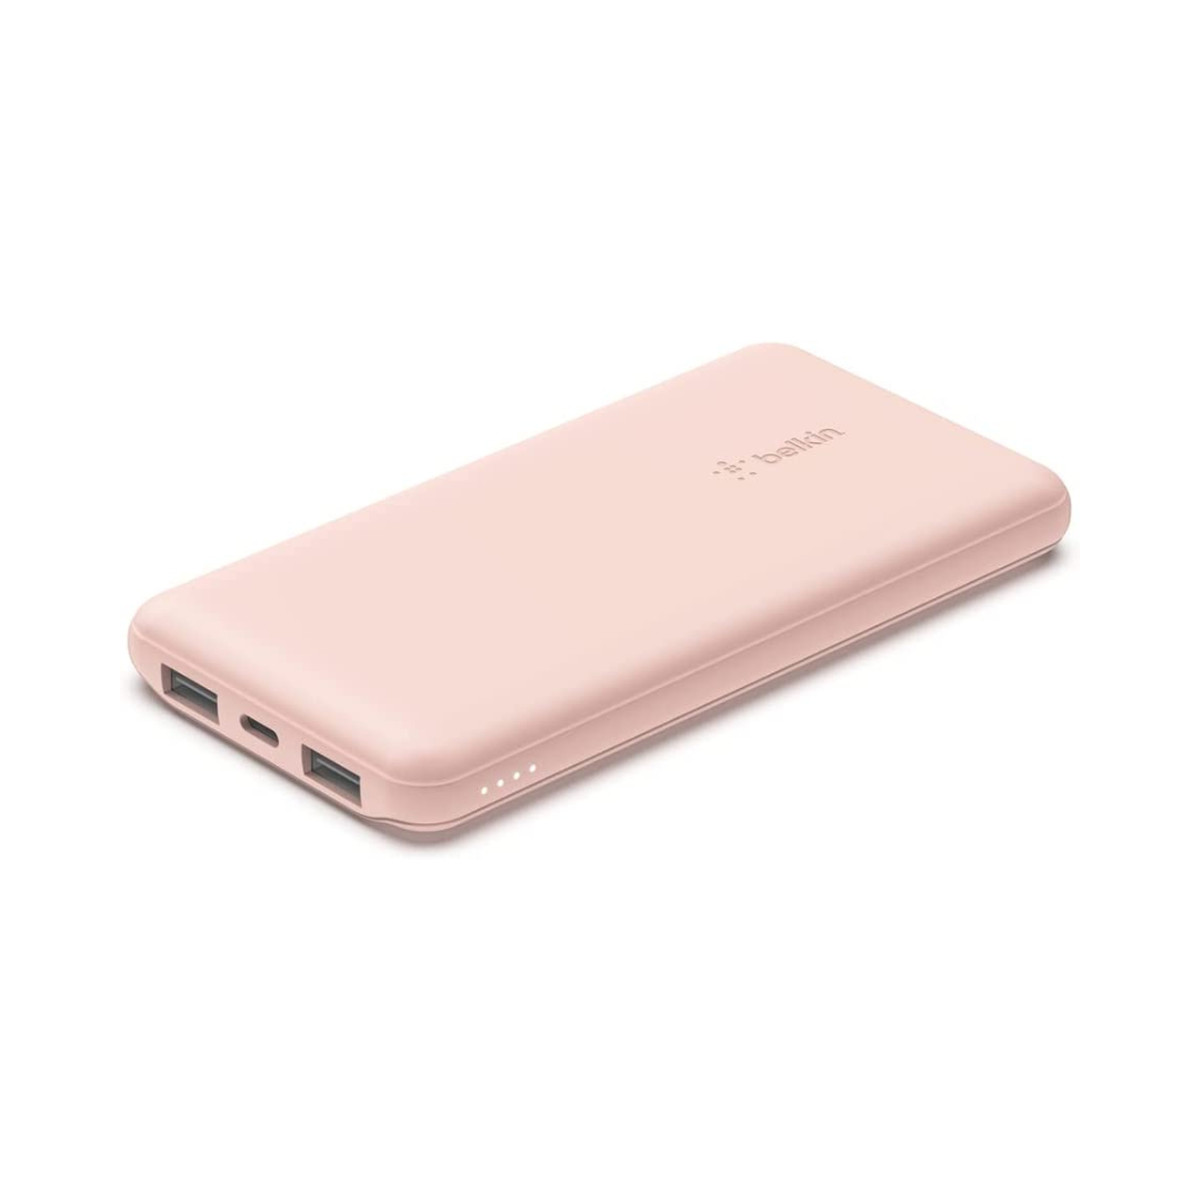 Belkin Portable Charger Power Bank